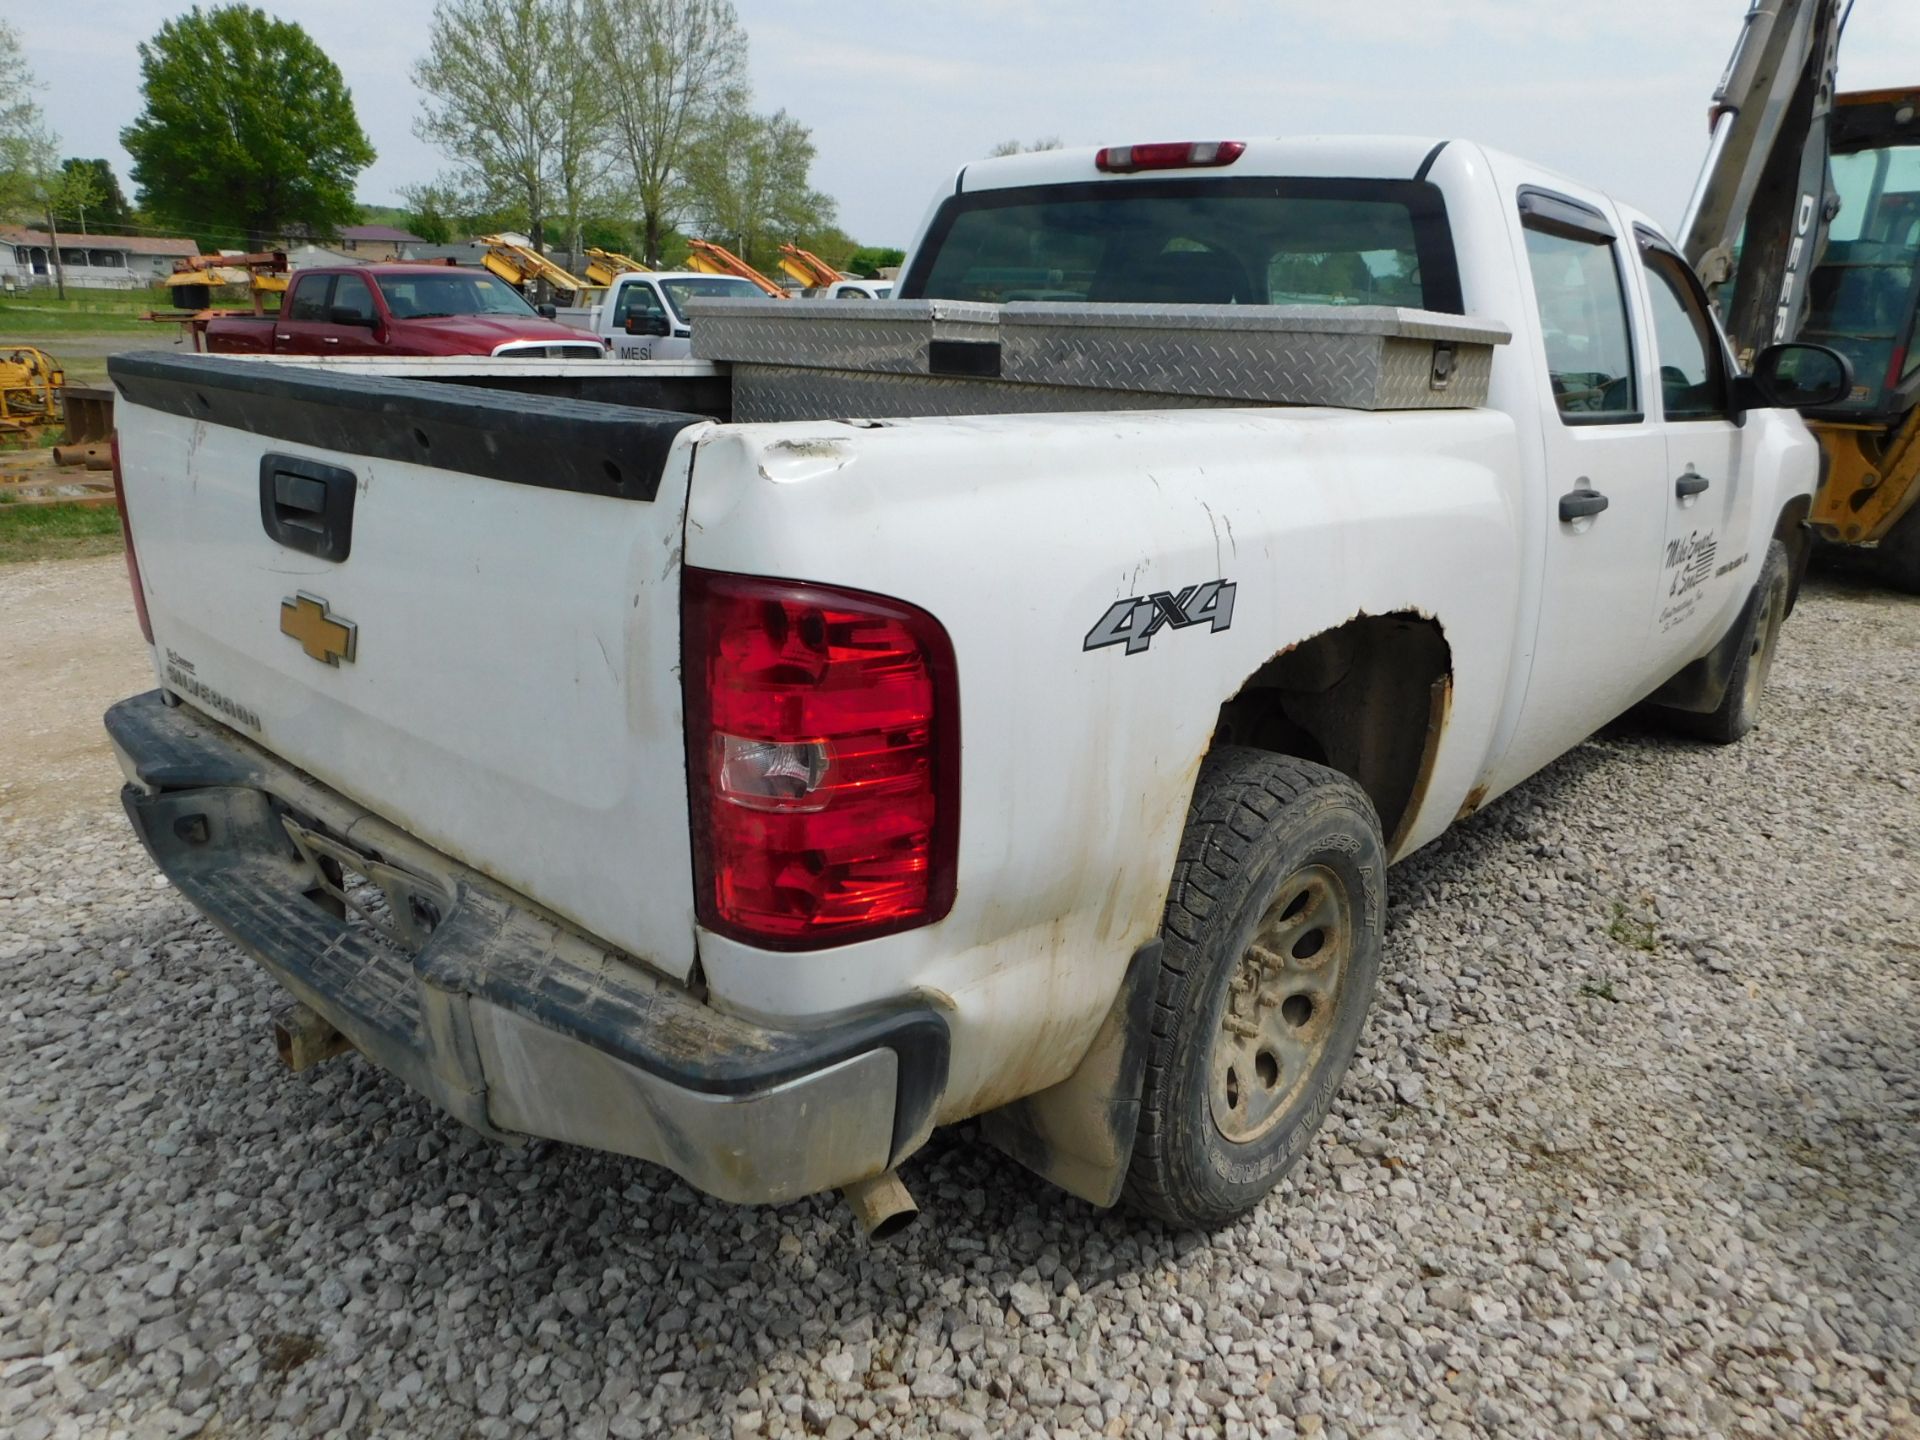 2007 Chevy Silverado 4 dr. pick-up truck, Auto Trans. , Air, am/fm, 4 Wheel Drive, 297,470 miles - Image 5 of 31